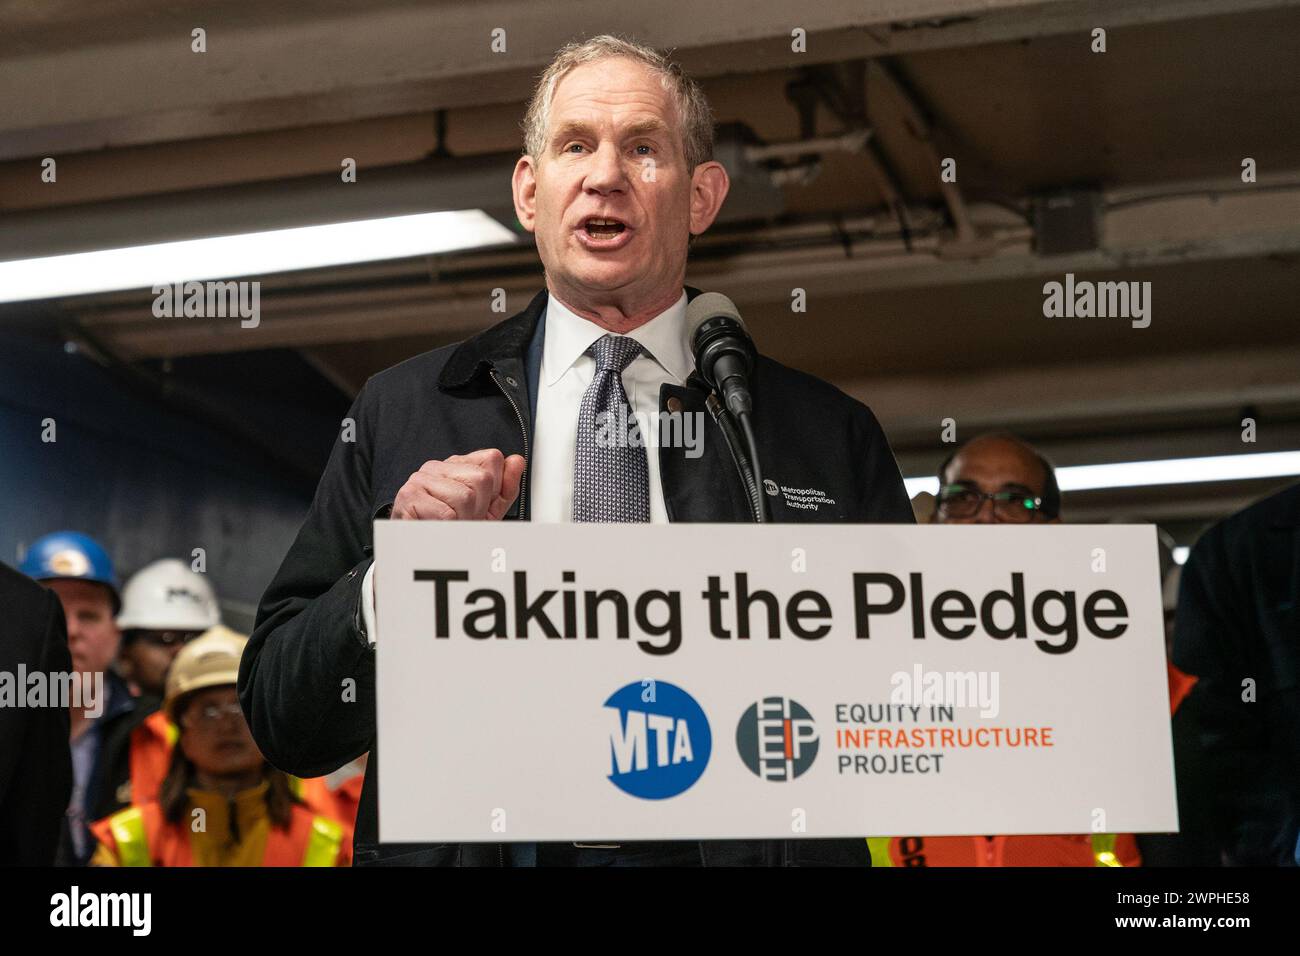 Janno Lieber, MTA Chair and CEO speaks during MTA announcement at 14th street subway station in New York. Dorval Carter Jr., Chicago Transit Authority President and Equity in Infrastructure Project Co-Chair, John Porcari, Equity in Infrastructure Project Co-Founder and Former U.S. Deputy Secretary of Transportation, Phillip Washington, Denver International Airport CEO and Equity in Infrastructure Project Chair, Janno Lieber, MTA Chair and CEO signed a pledge to promote minorities and women owned business to receive contracts to work on infrastructure projects for public transportation. (Photo Stock Photo